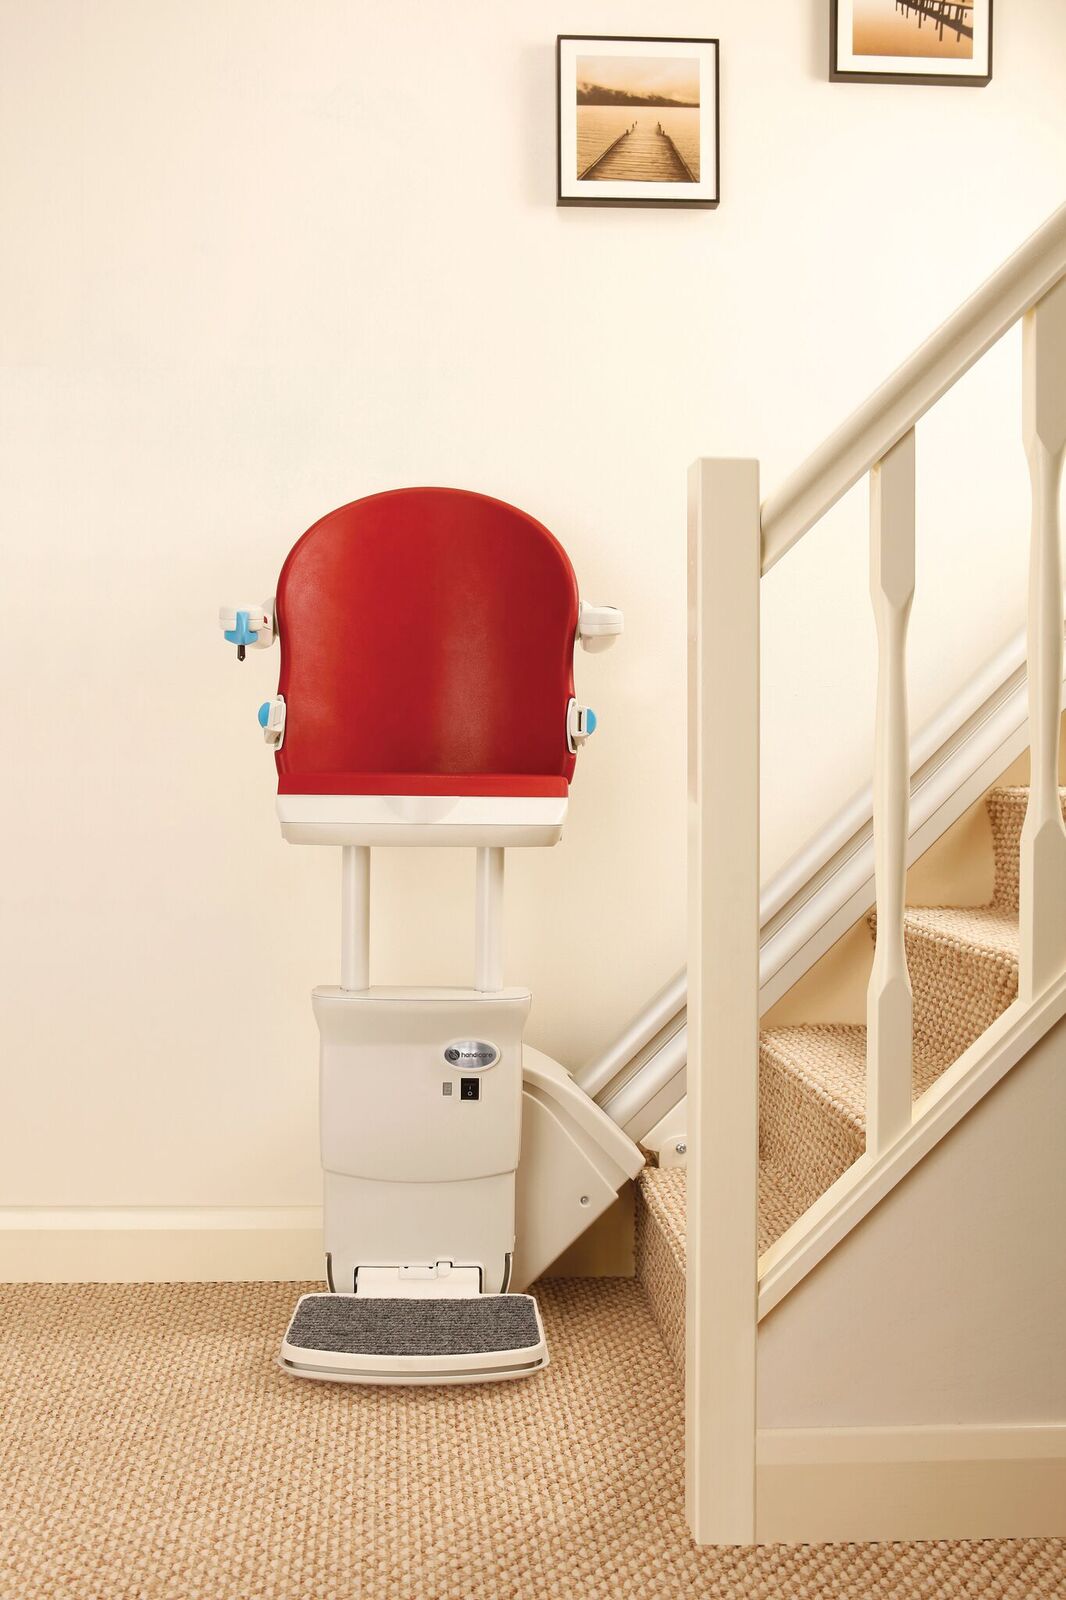 Pa Stairlifts, Peak Stairlifts, Handicare, York